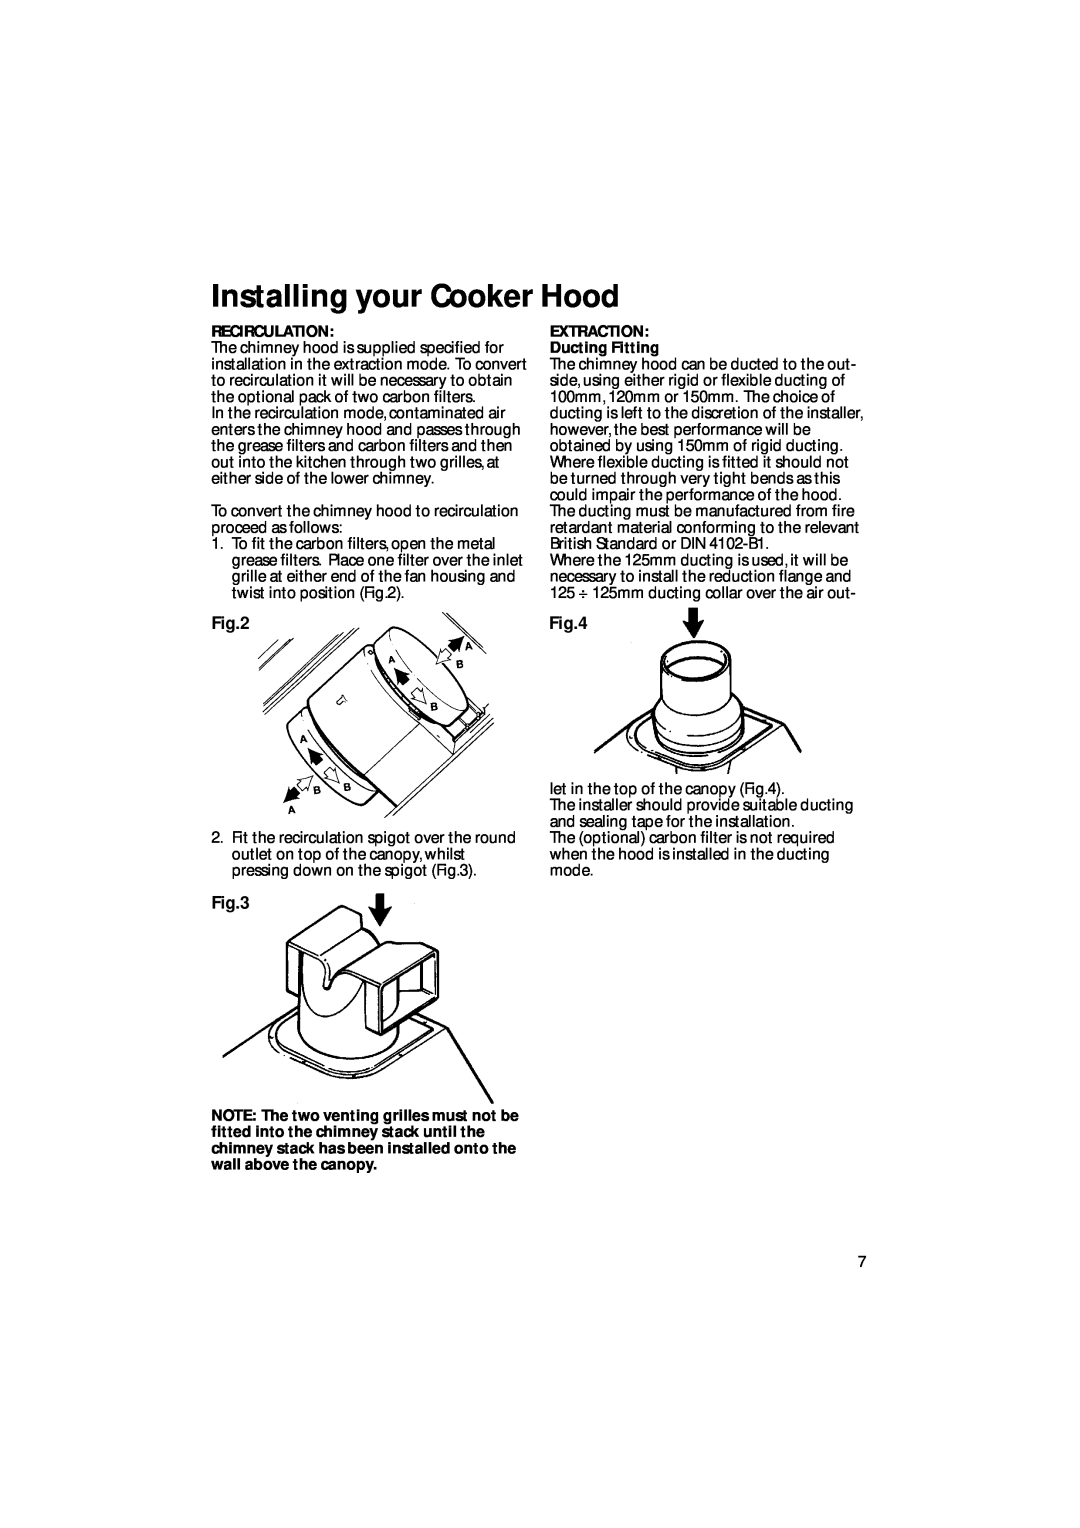 Creda CRC60 manual Installing your Cooker Hood, Recirculation, EXTRACTION Ducting Fitting 